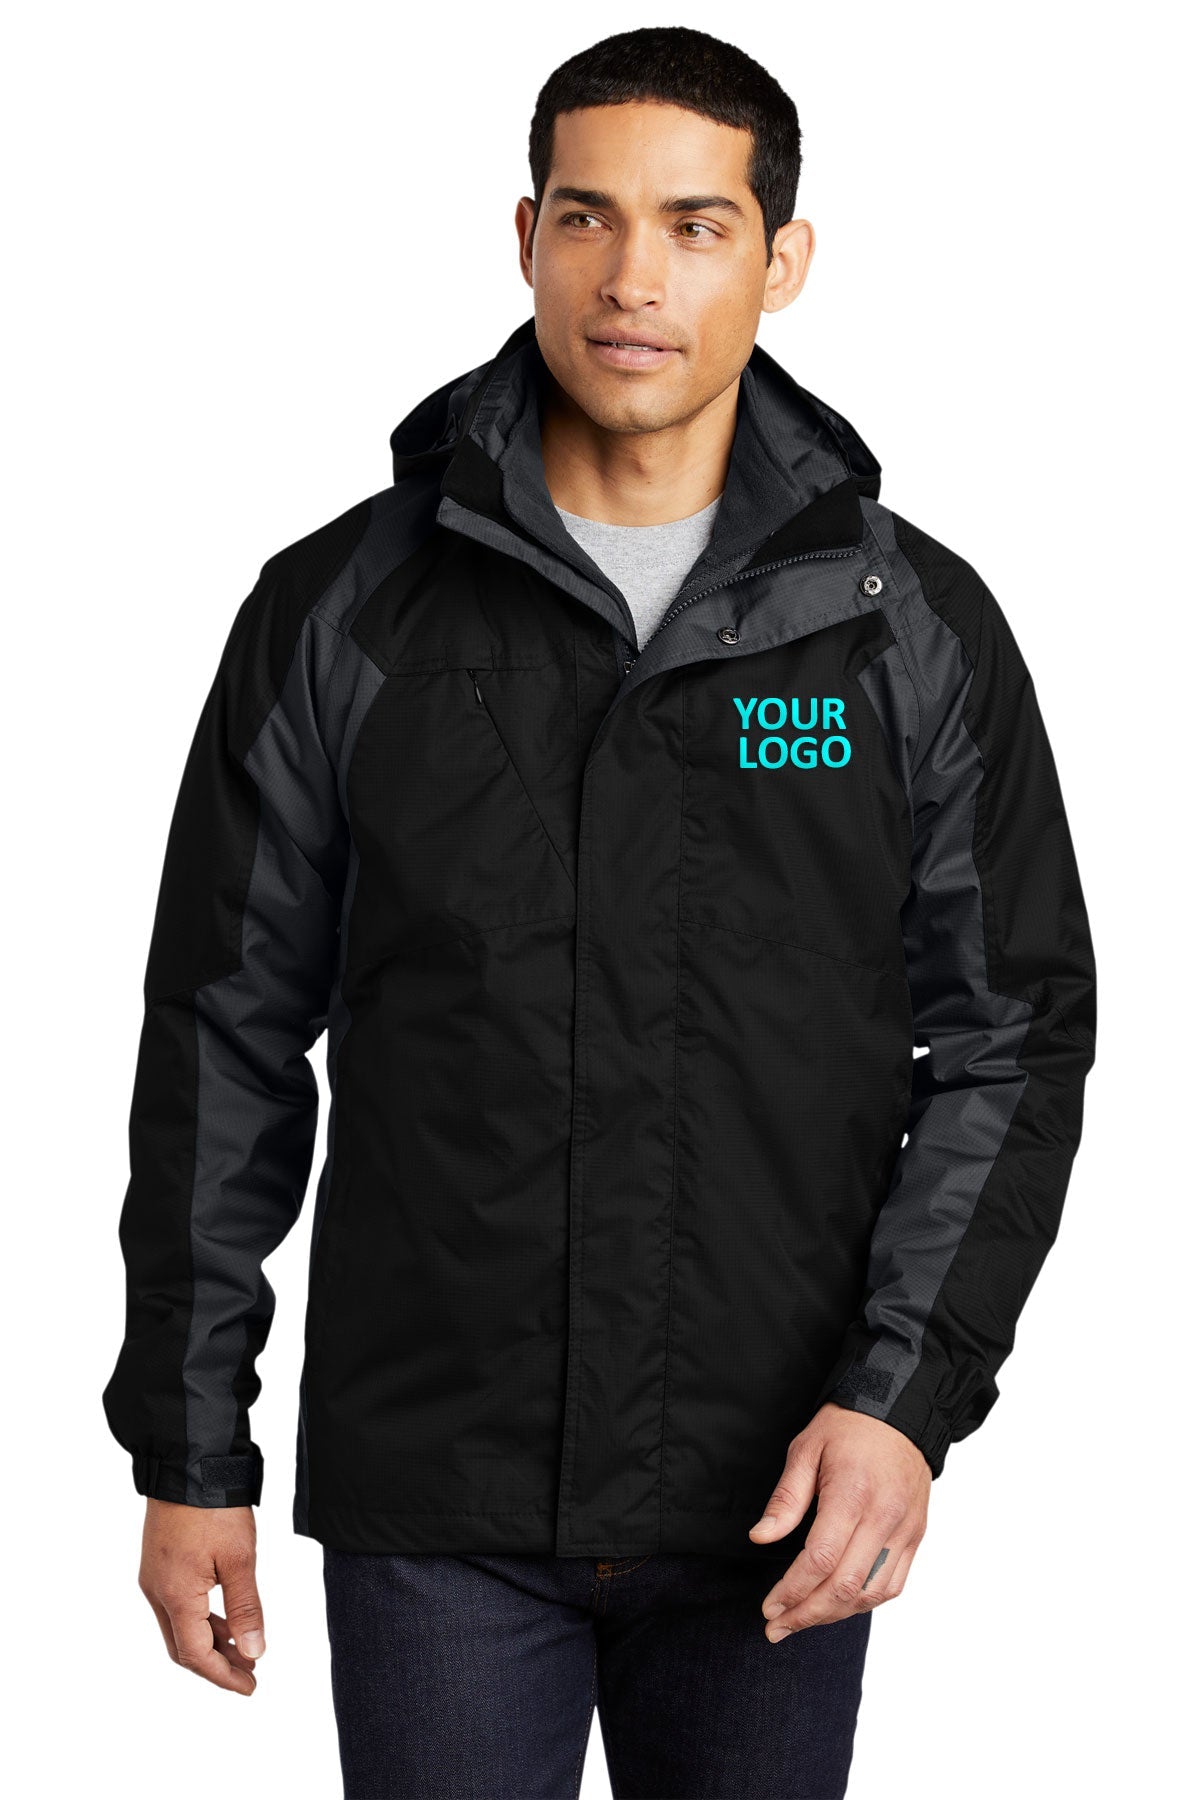 Port Authority Ranger 3-in-1 Customized Jackets, Black/ Ink Grey